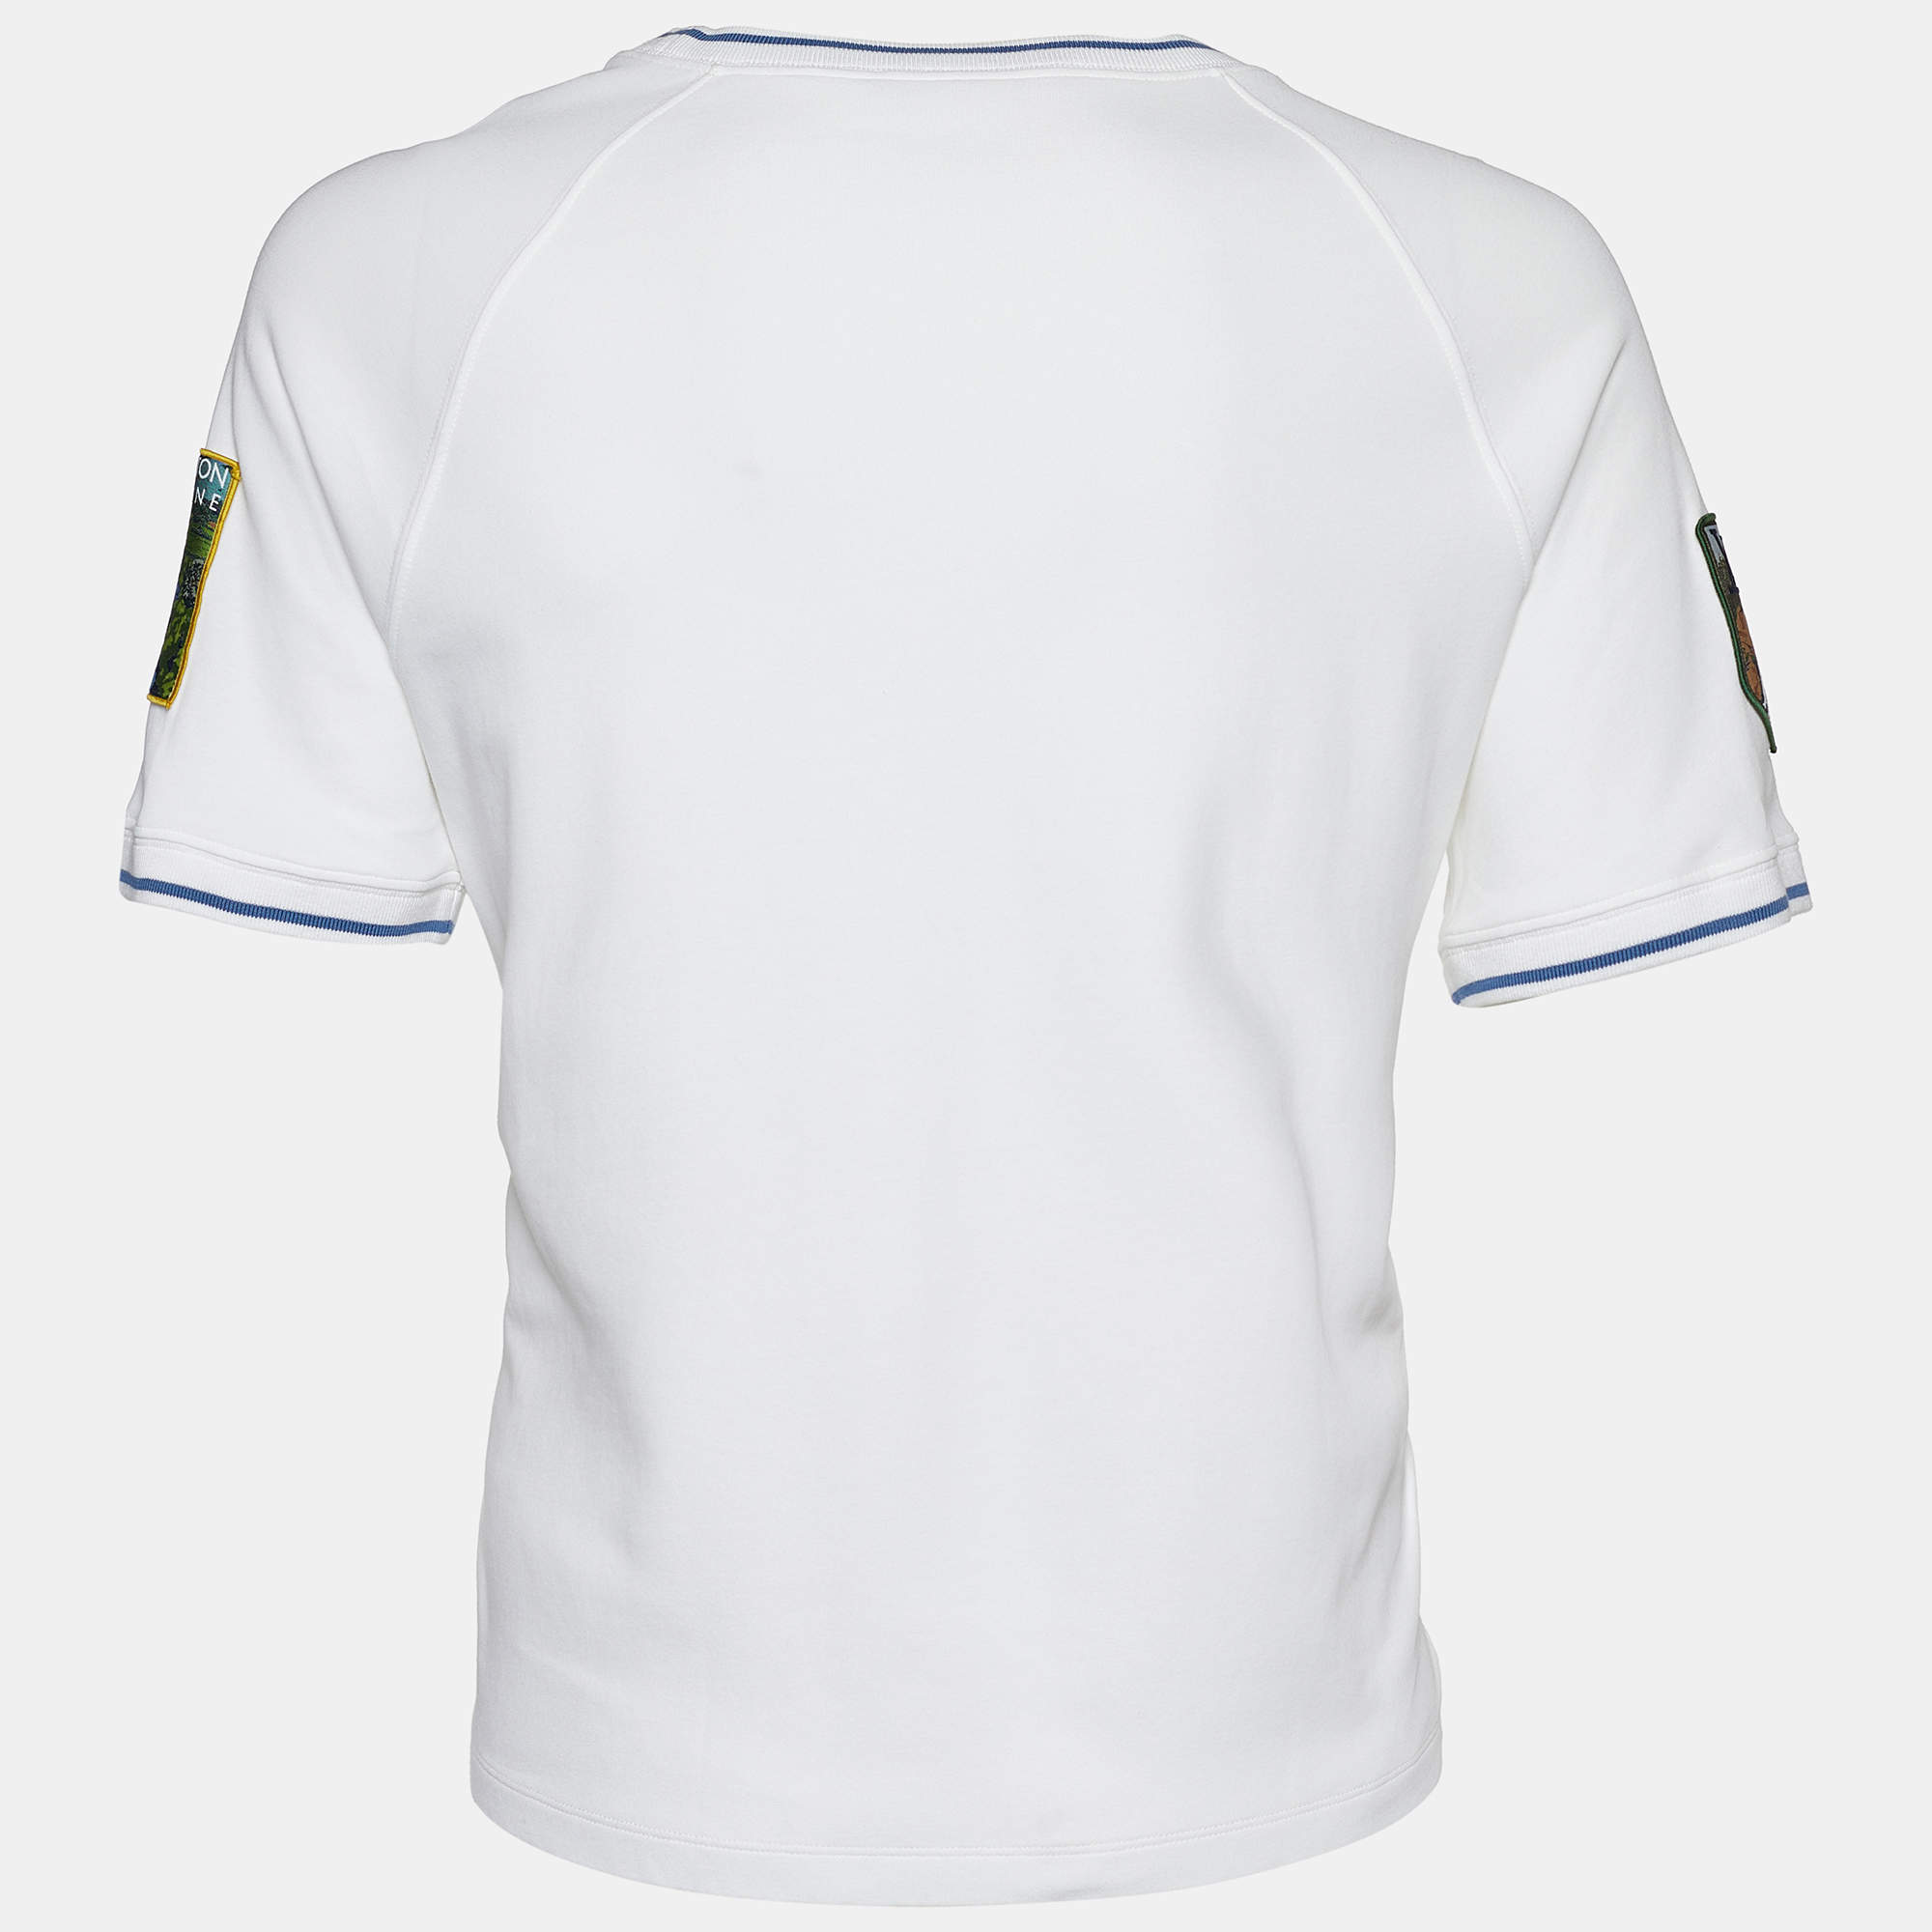 Louis Vuitton White National Parks Patches Tee – Savonches